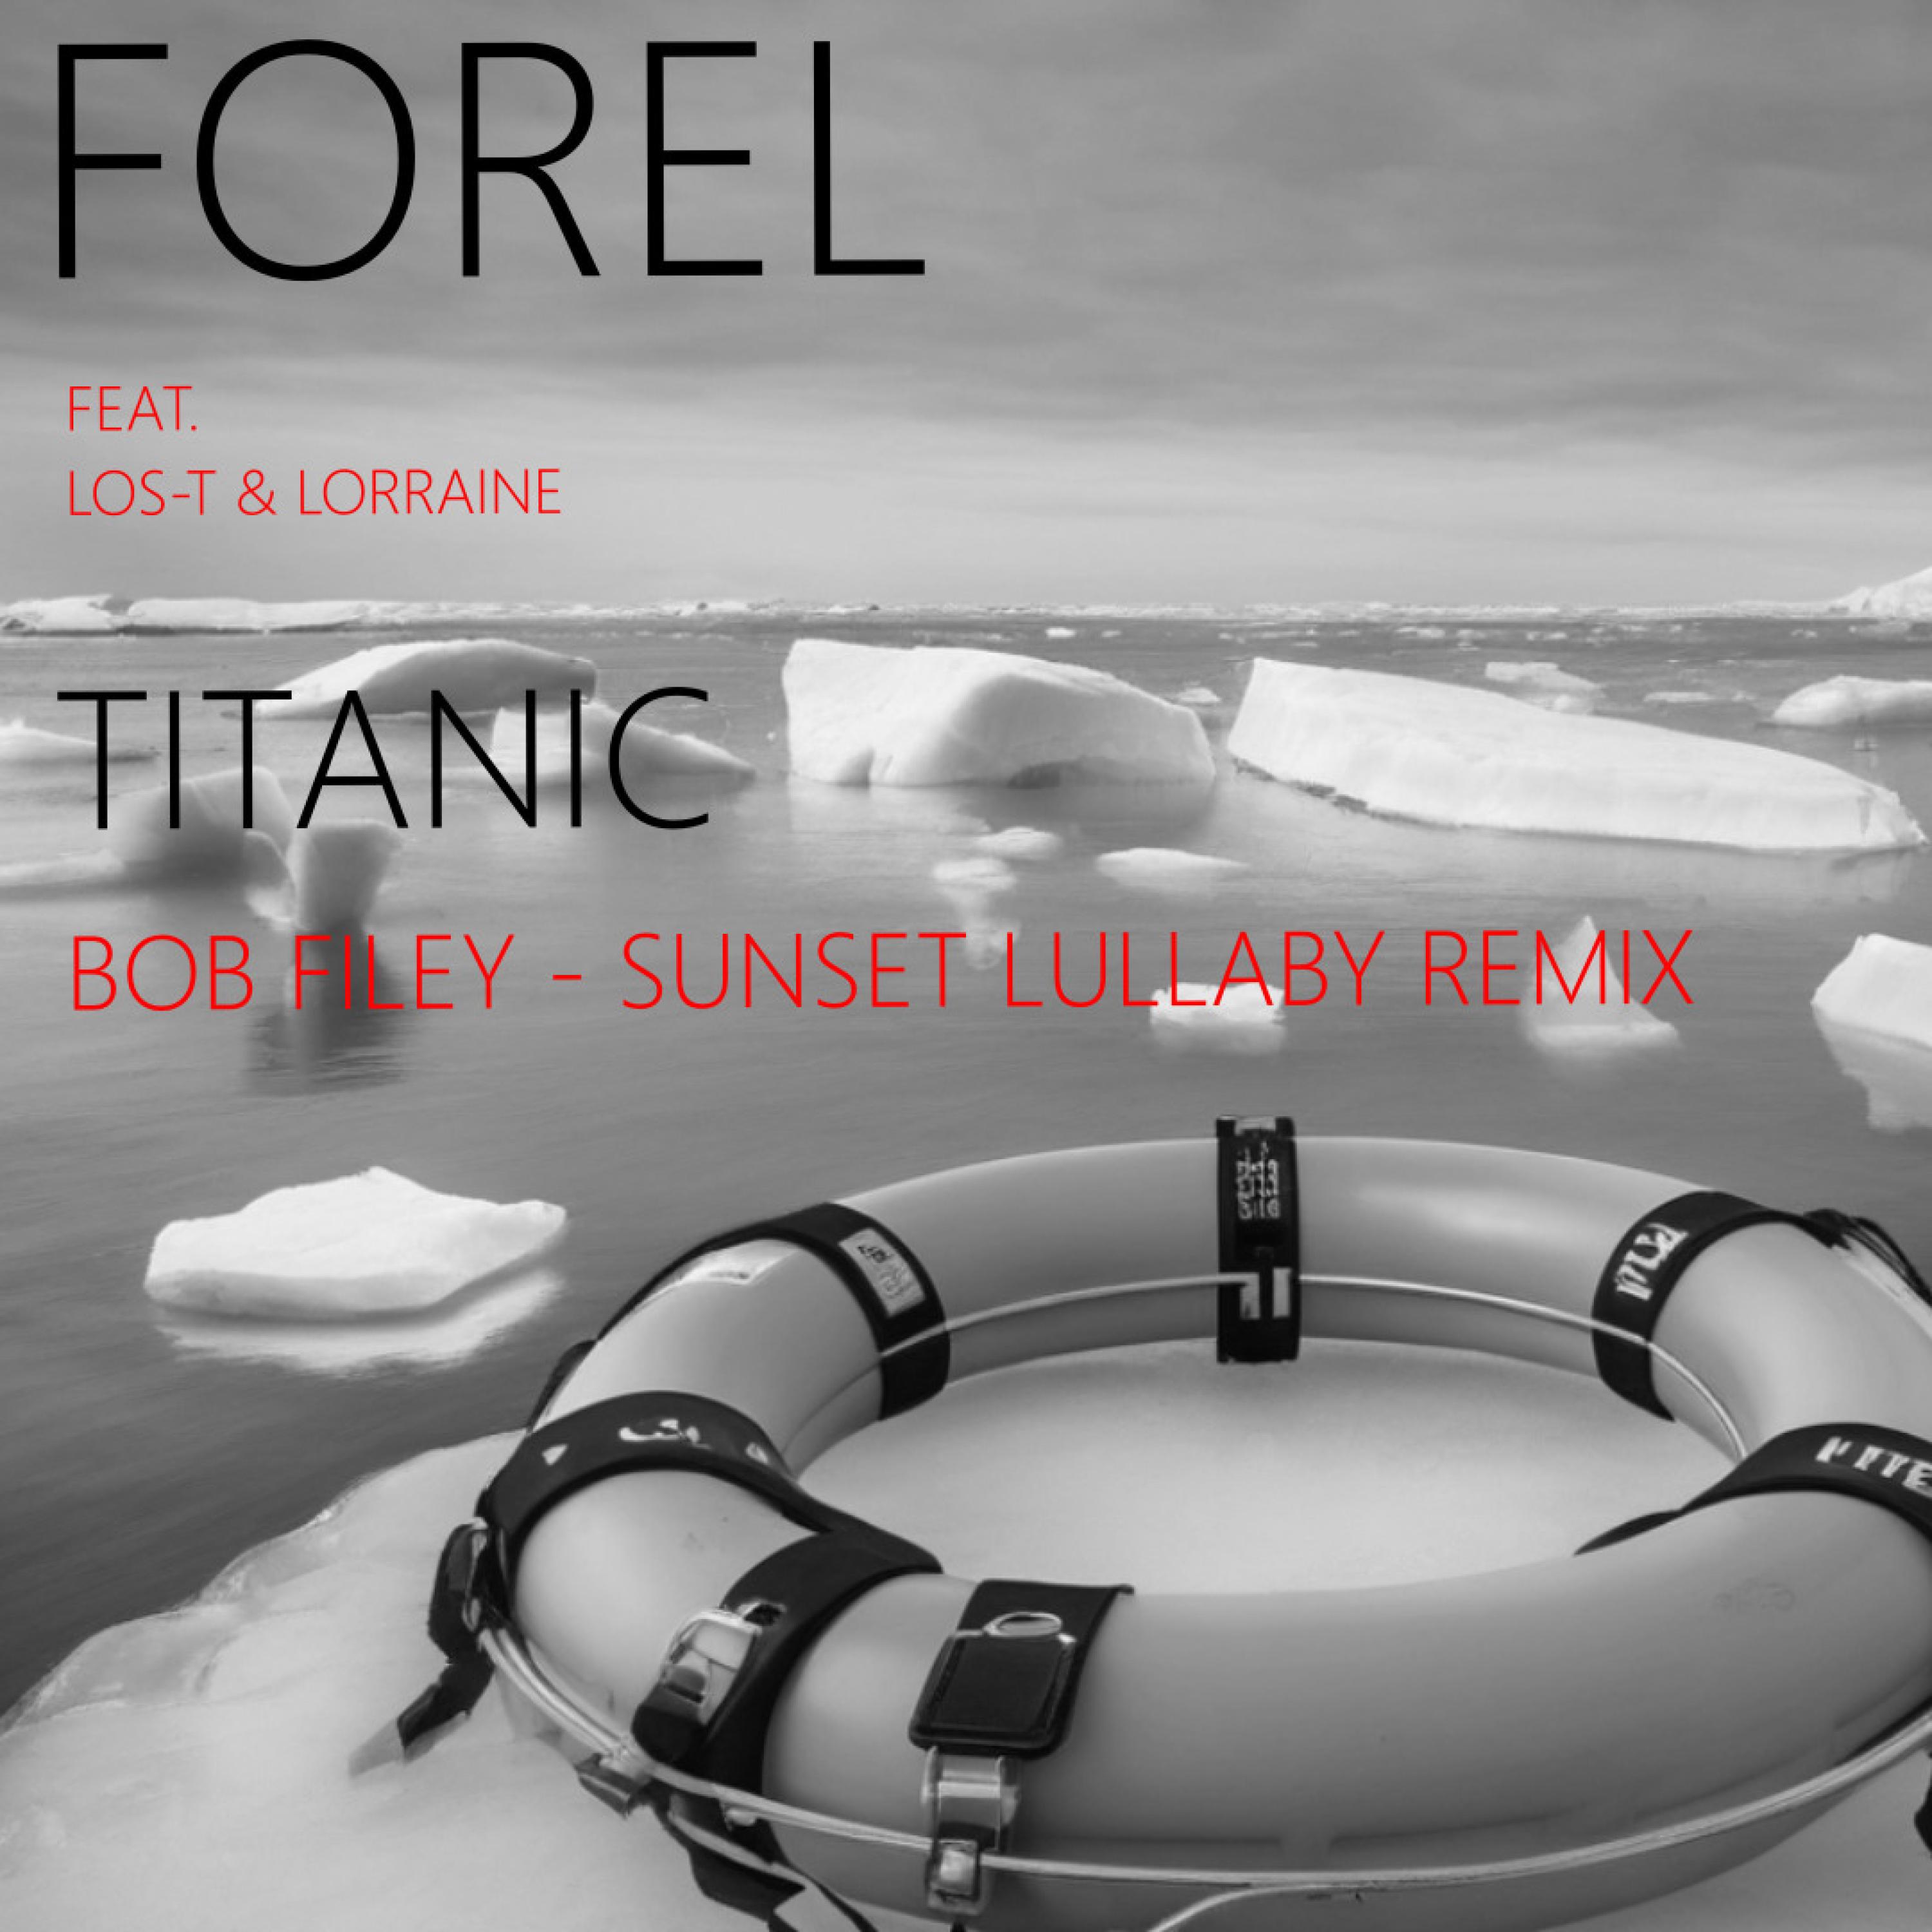 FOREL THE BAND - Titanic (feat. Los-T & Lorraine) (Bob Filey - Sunset Lullaby Remix)